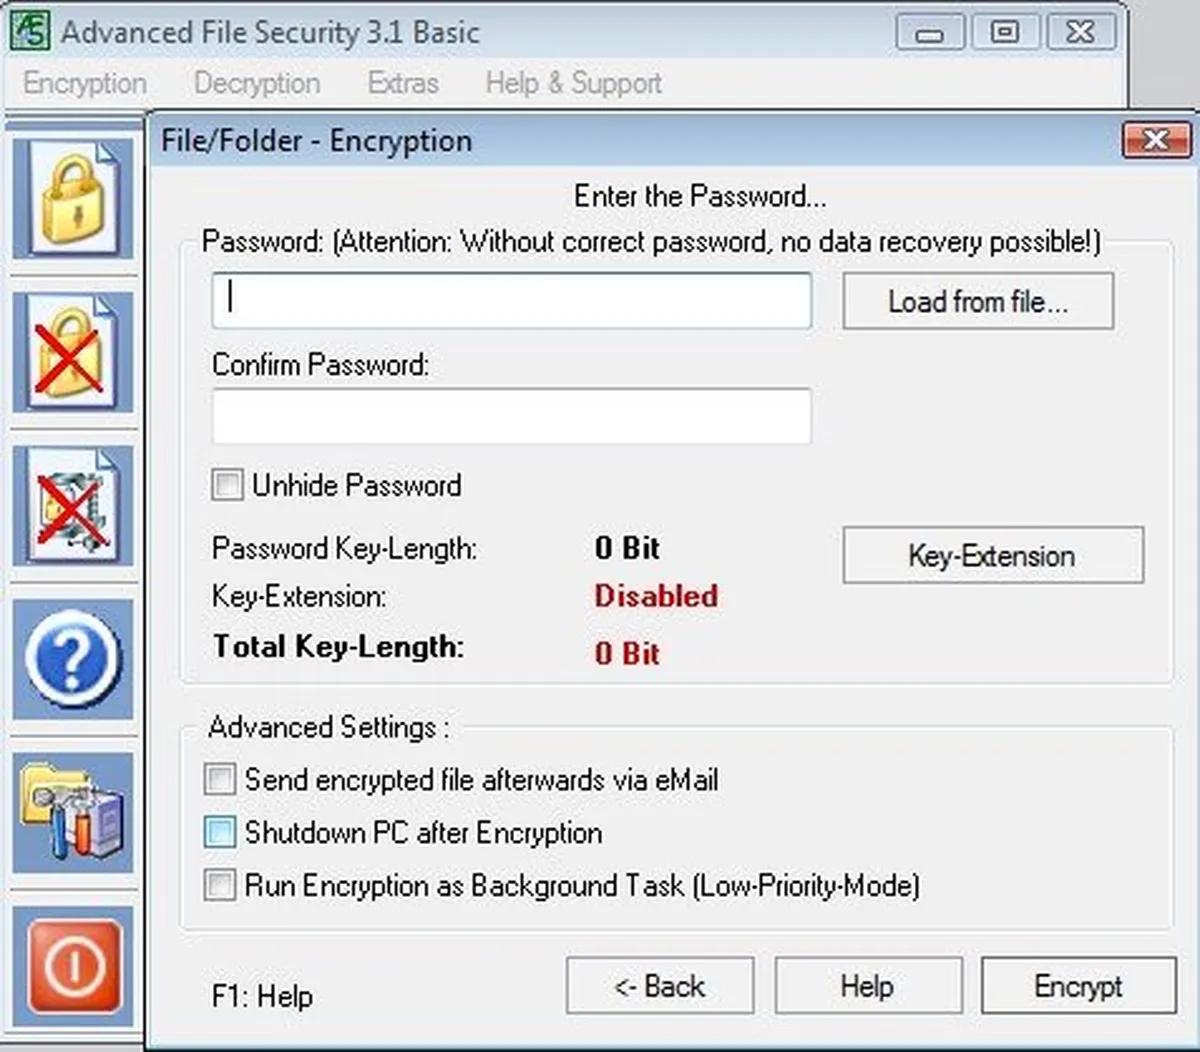 Advanced File Security Basic Review